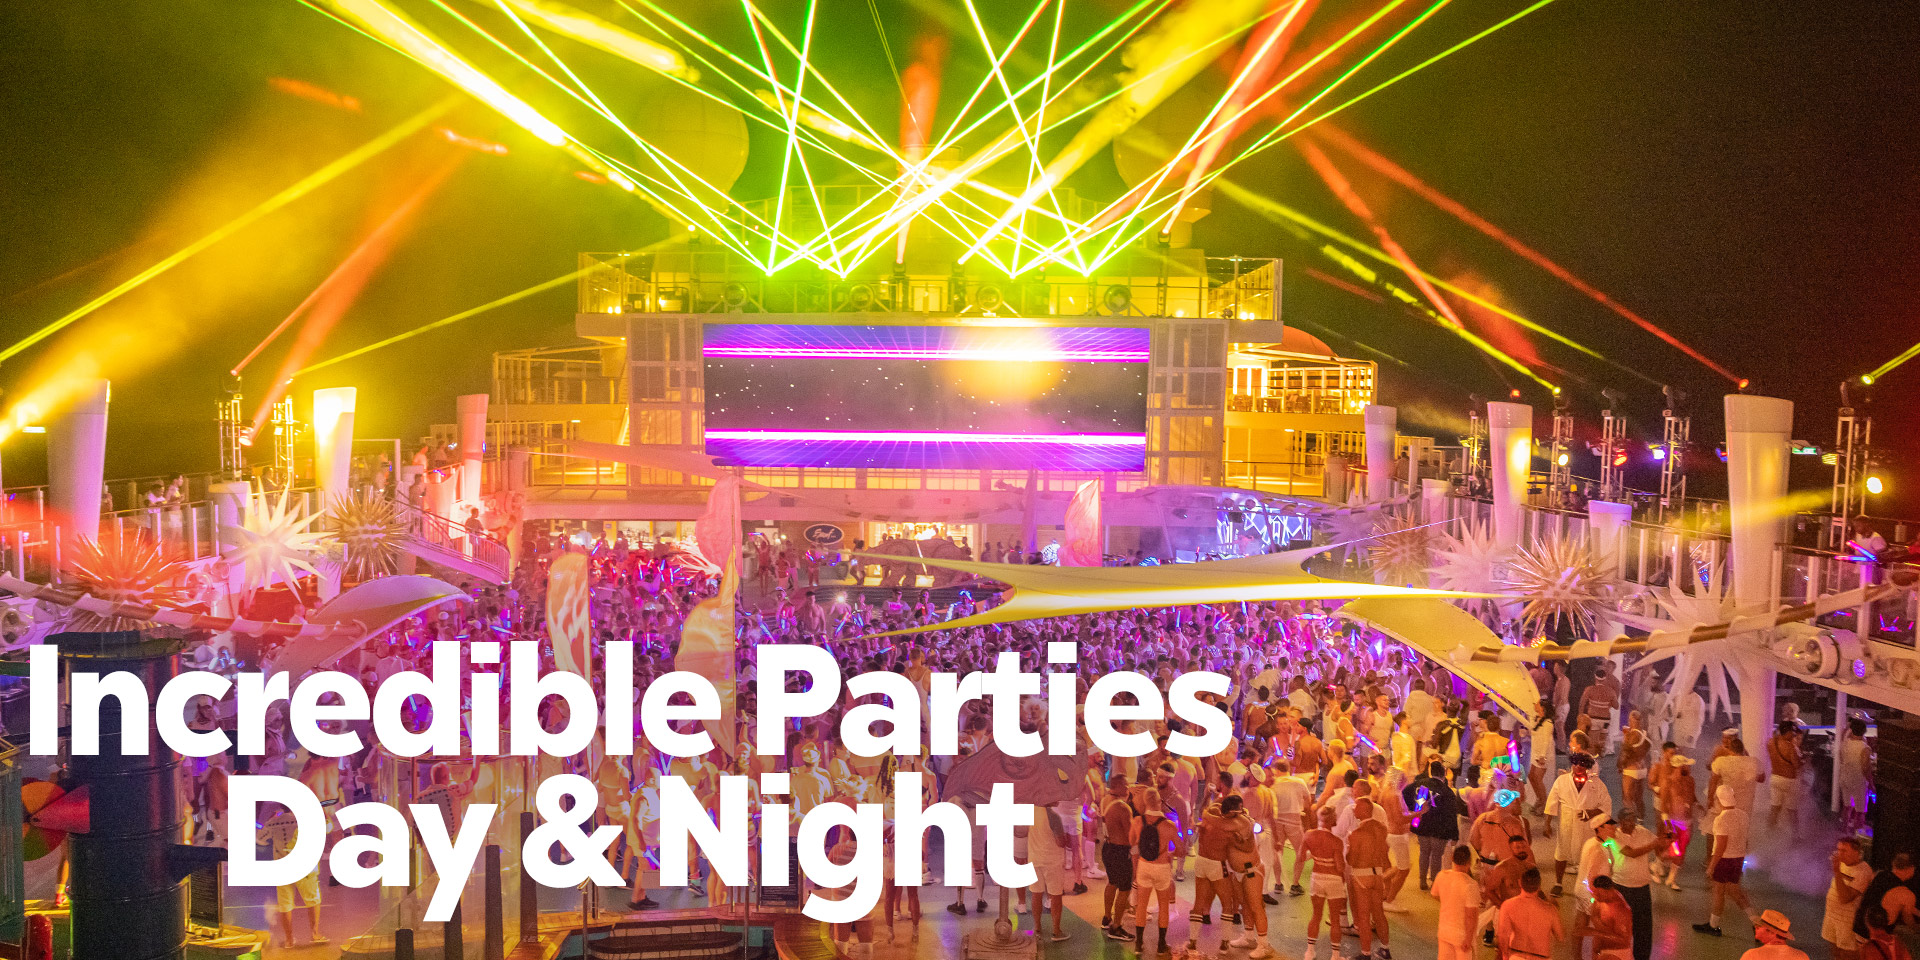 Incredible Parties. Day & Night.